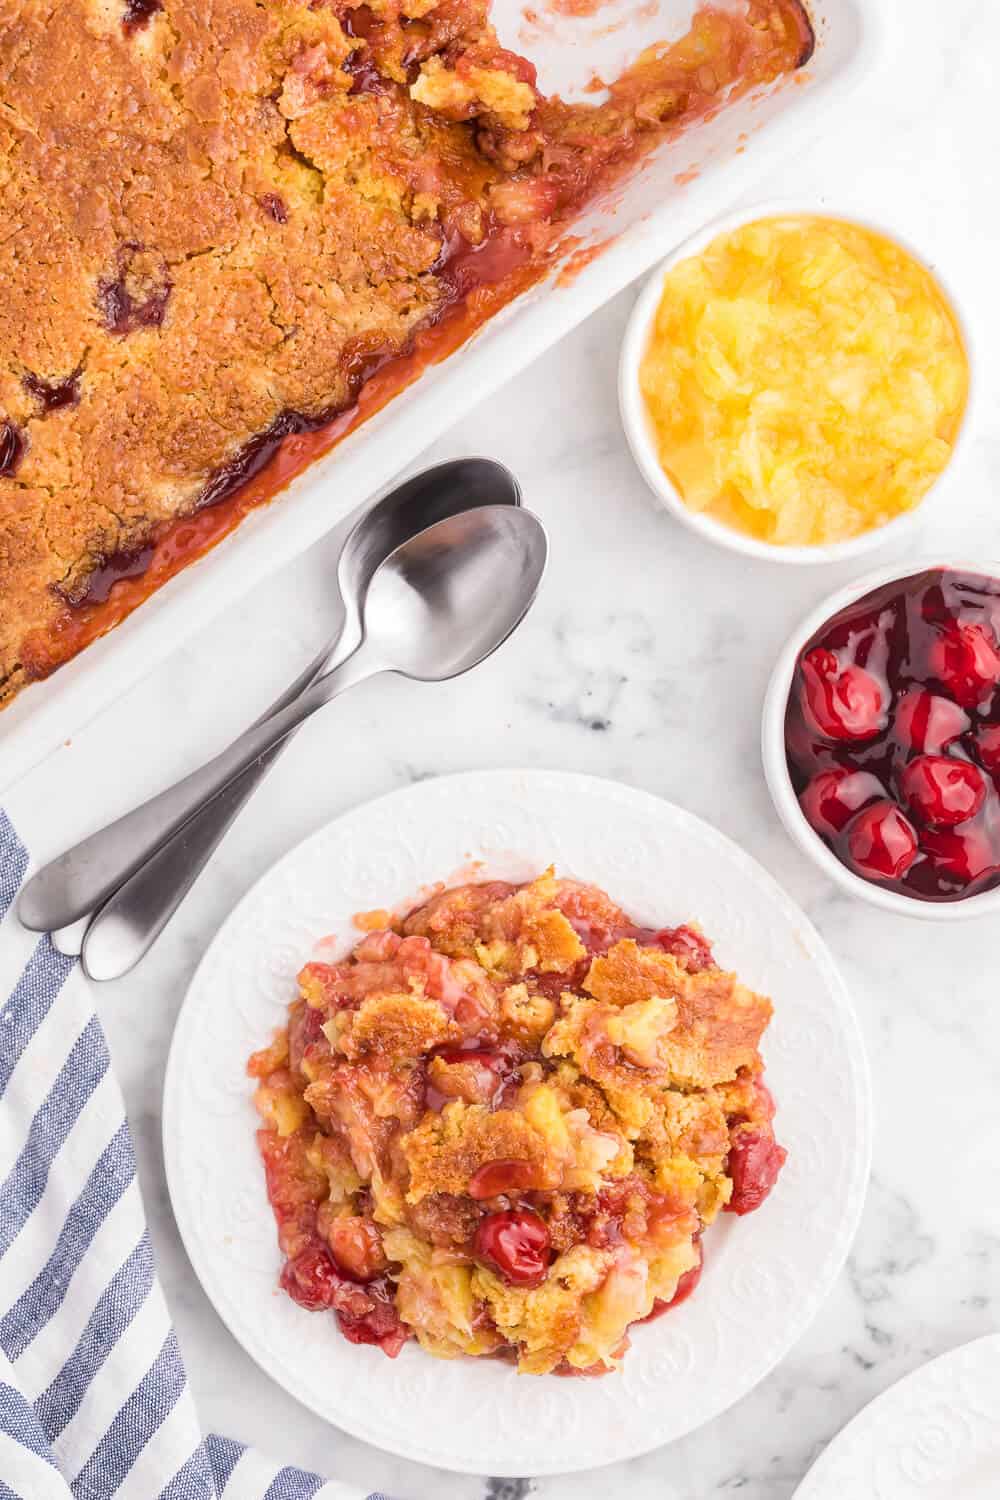 Cherry Pineapple Dump Cake Recipe - Made in 1 pan and only 4 ingredients in this quick and easy dessert recipe. Short prep time and no mixing! Perfect for potlucks and cookouts.